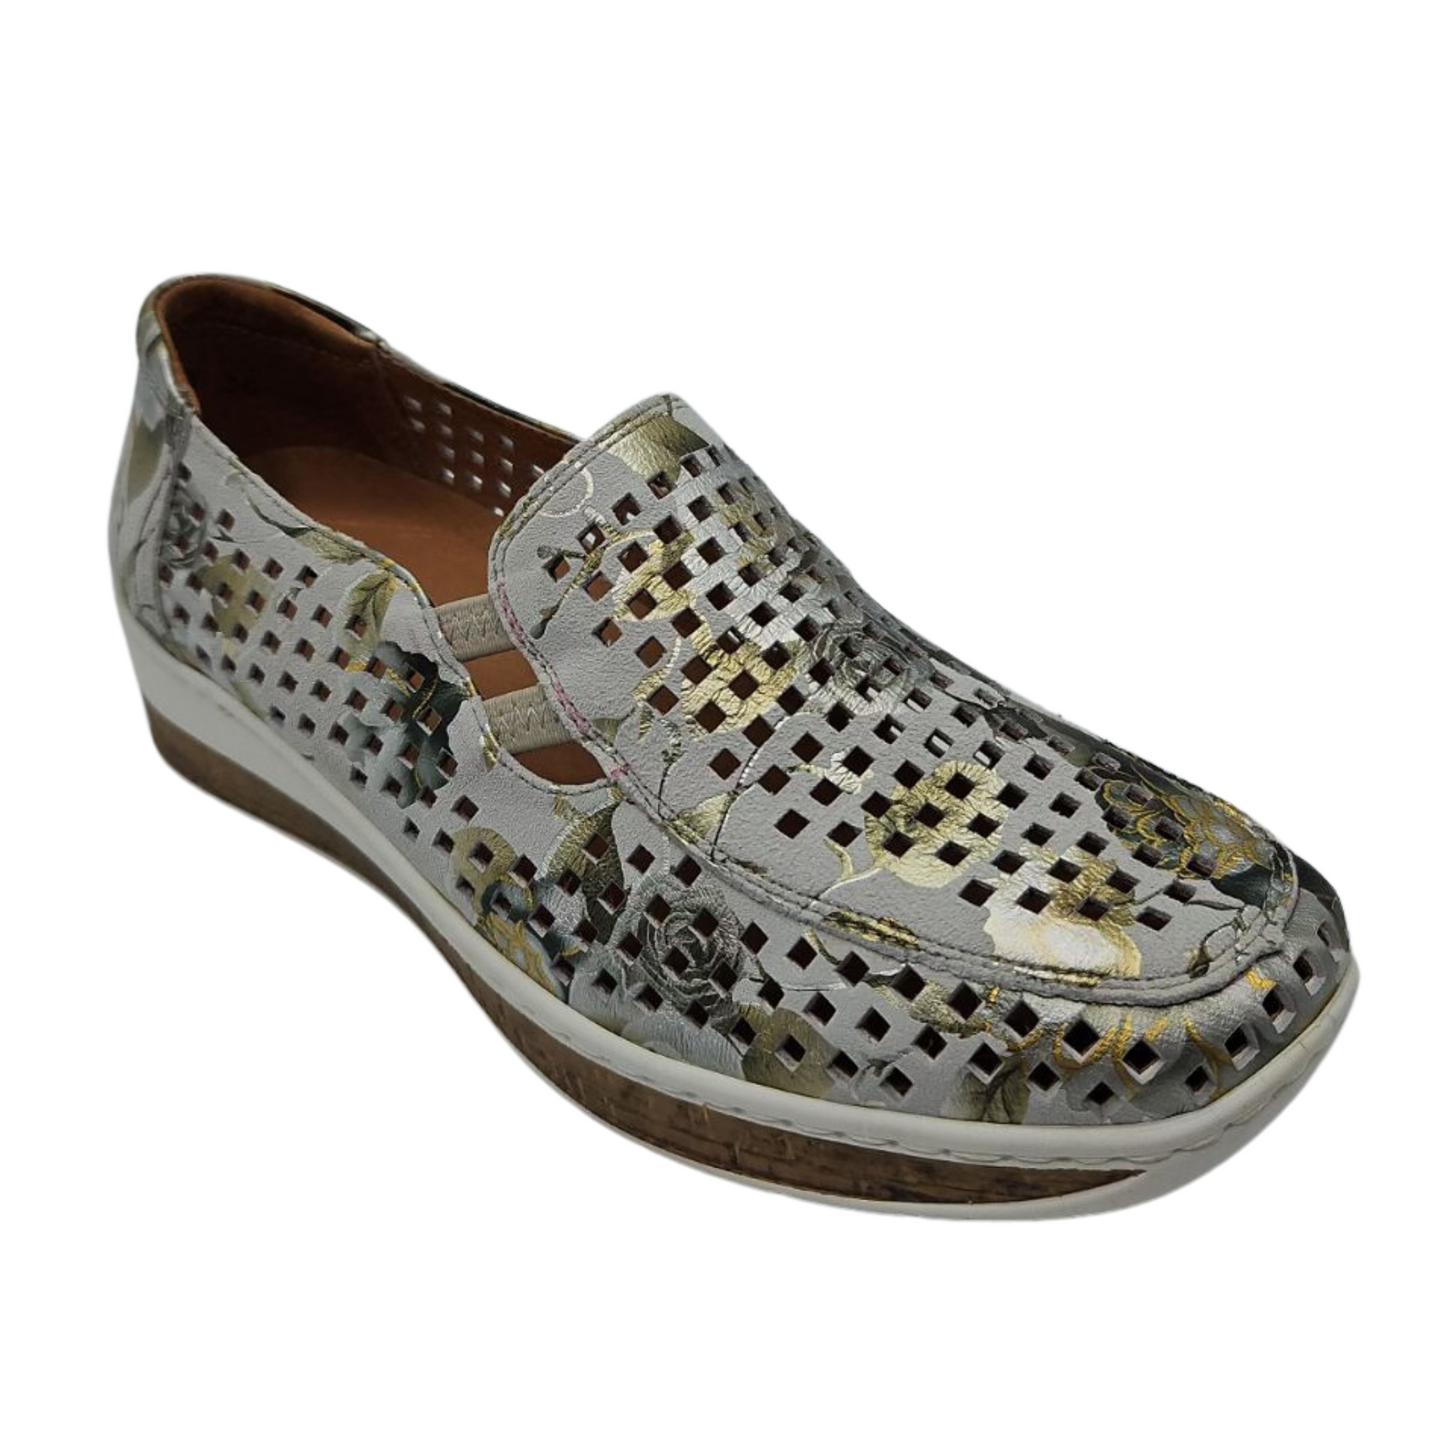 45 degree angled view of perforated leather shoe with padded footbed